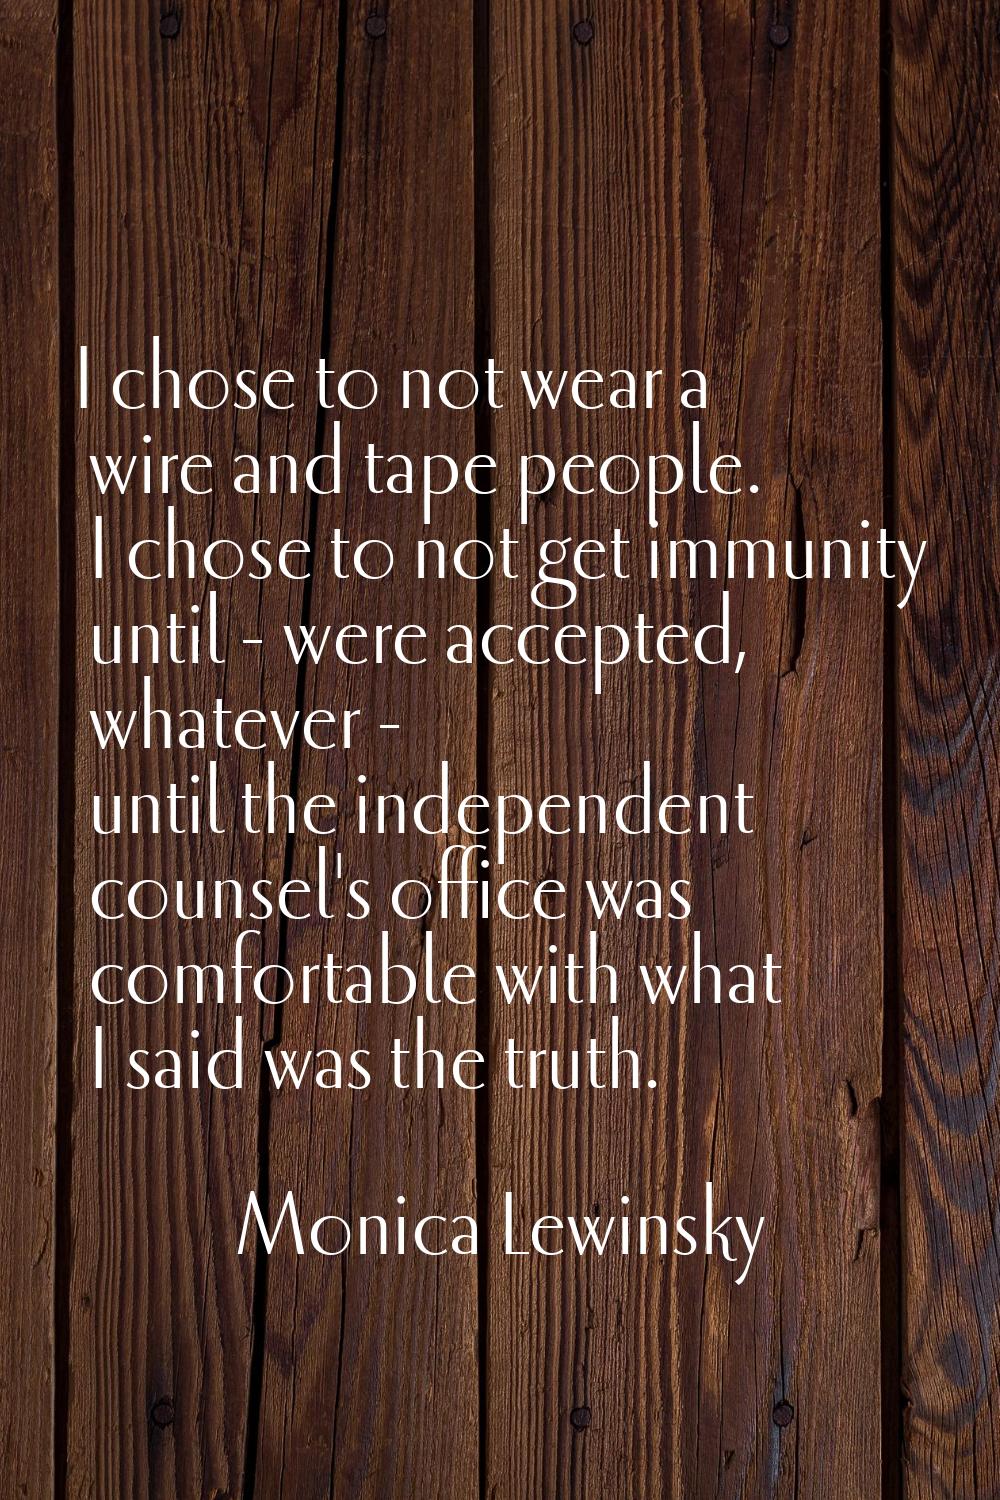 I chose to not wear a wire and tape people. I chose to not get immunity until - were accepted, what